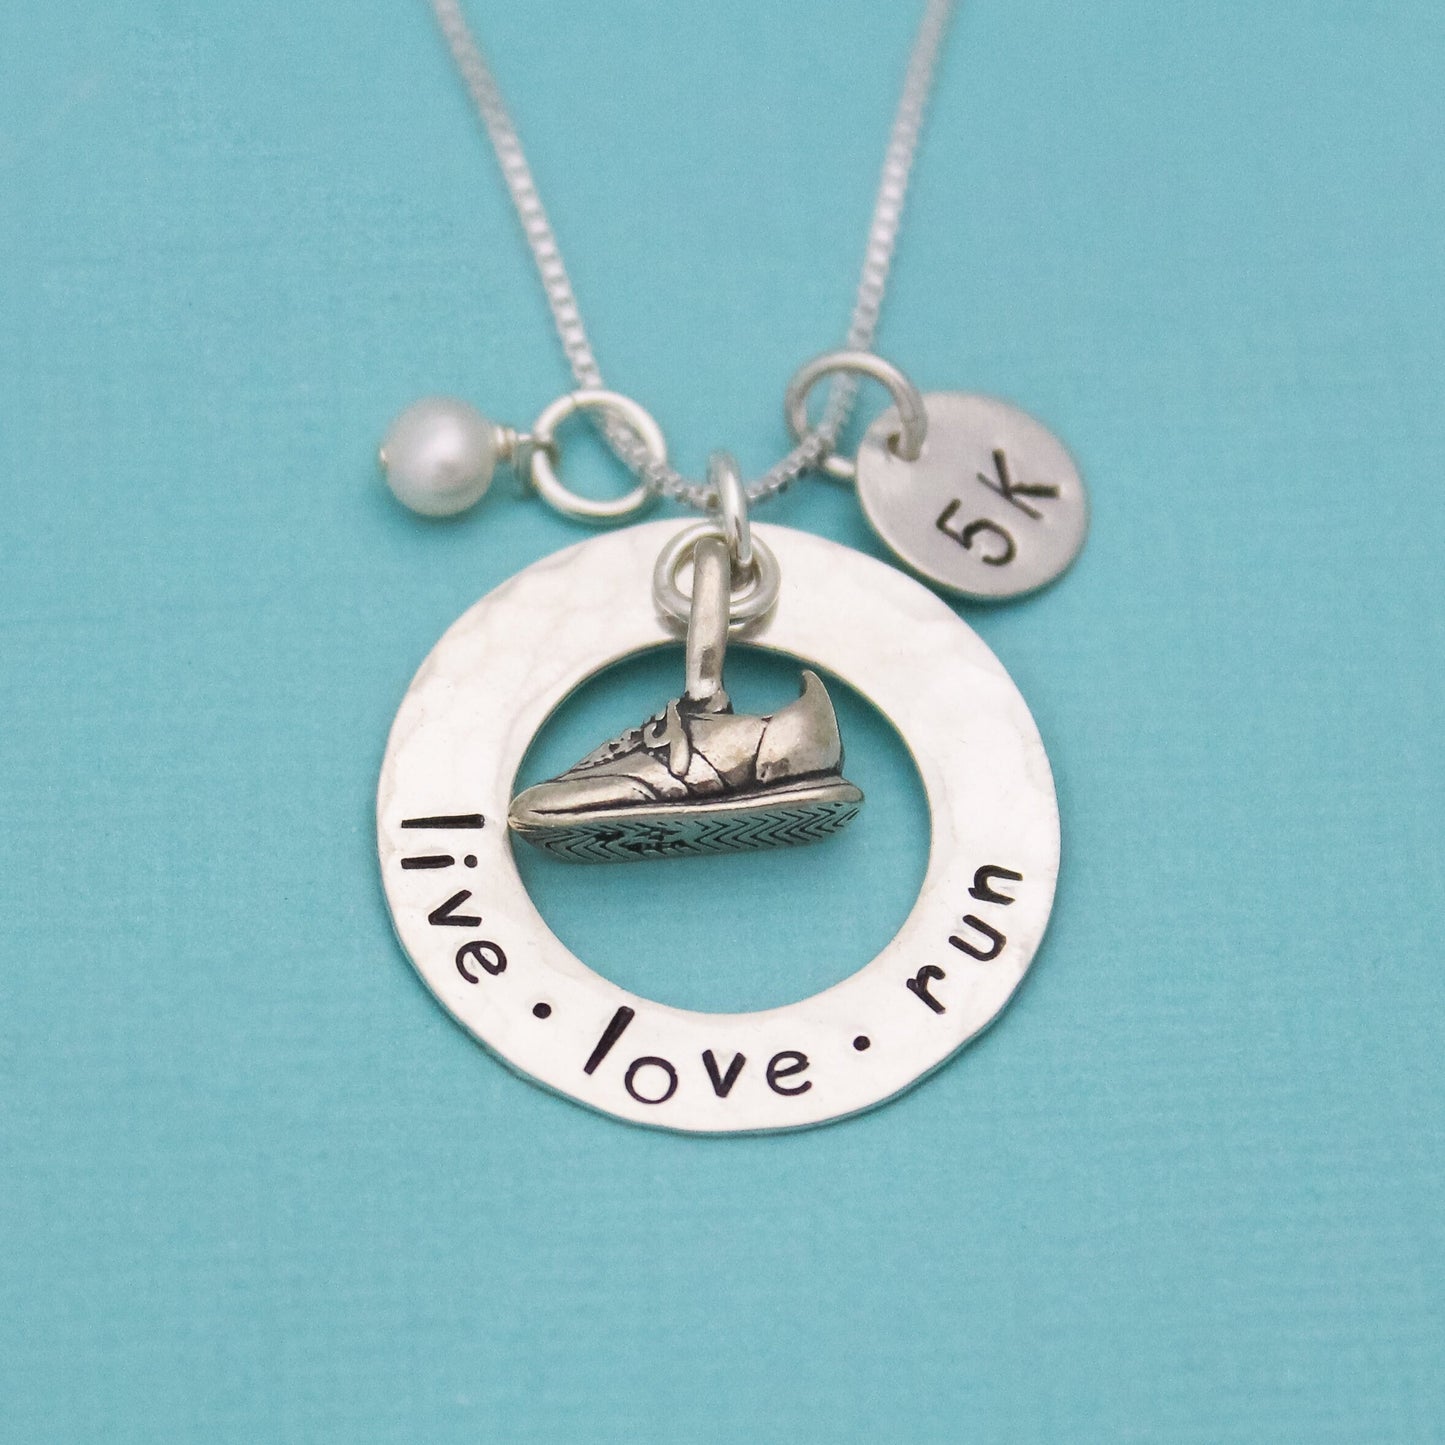 Running Jewelry, Live Love Run Necklace, Marathon Race Necklace, Sneaker Charm Pendant, 5K Necklace, Runner Jewelry, Running Gift